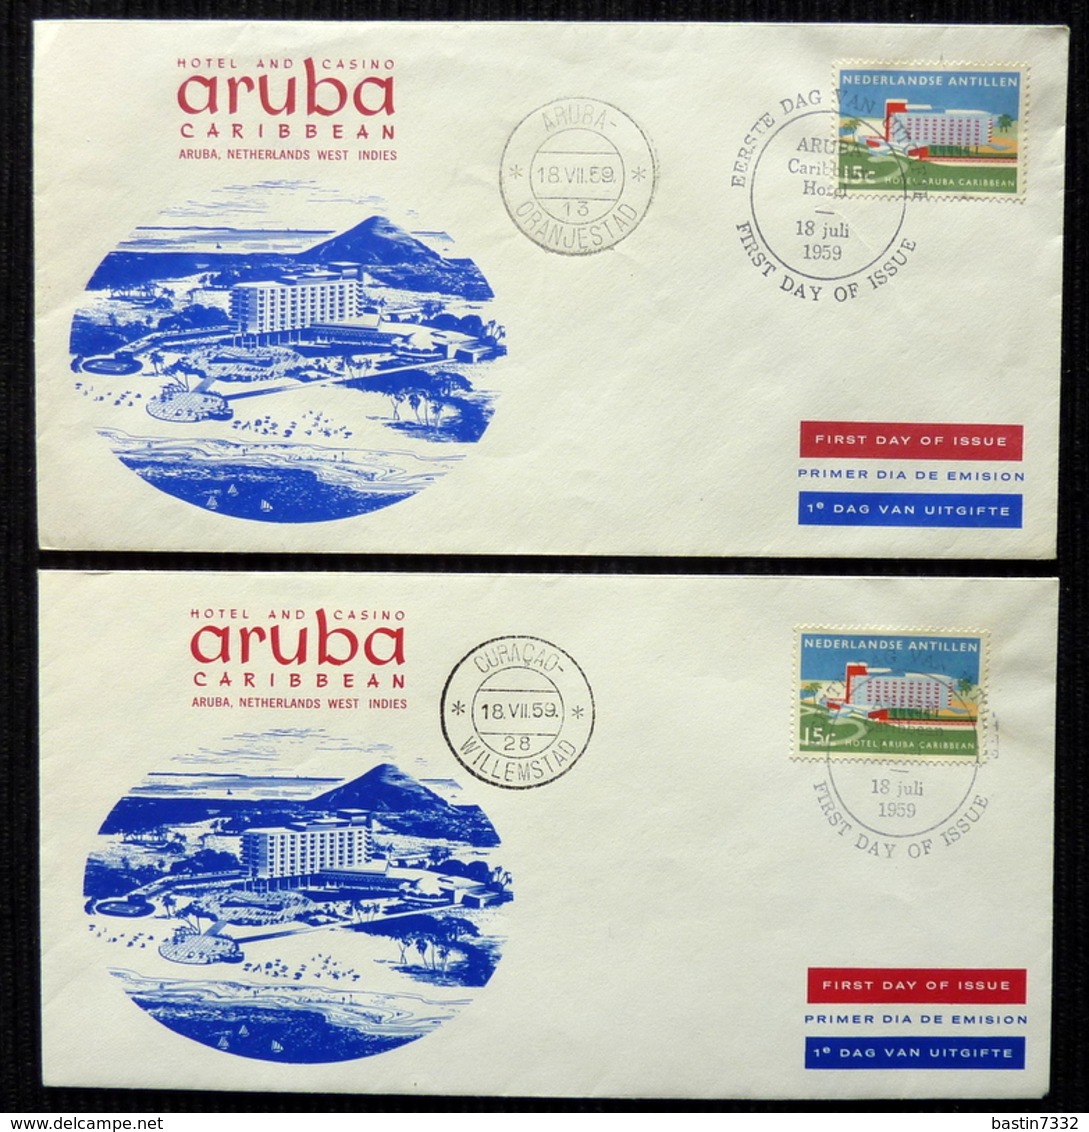 Netherlands/Pays-Bas+colonies old collection FDC,letters,covers etc. high catalogue value!!